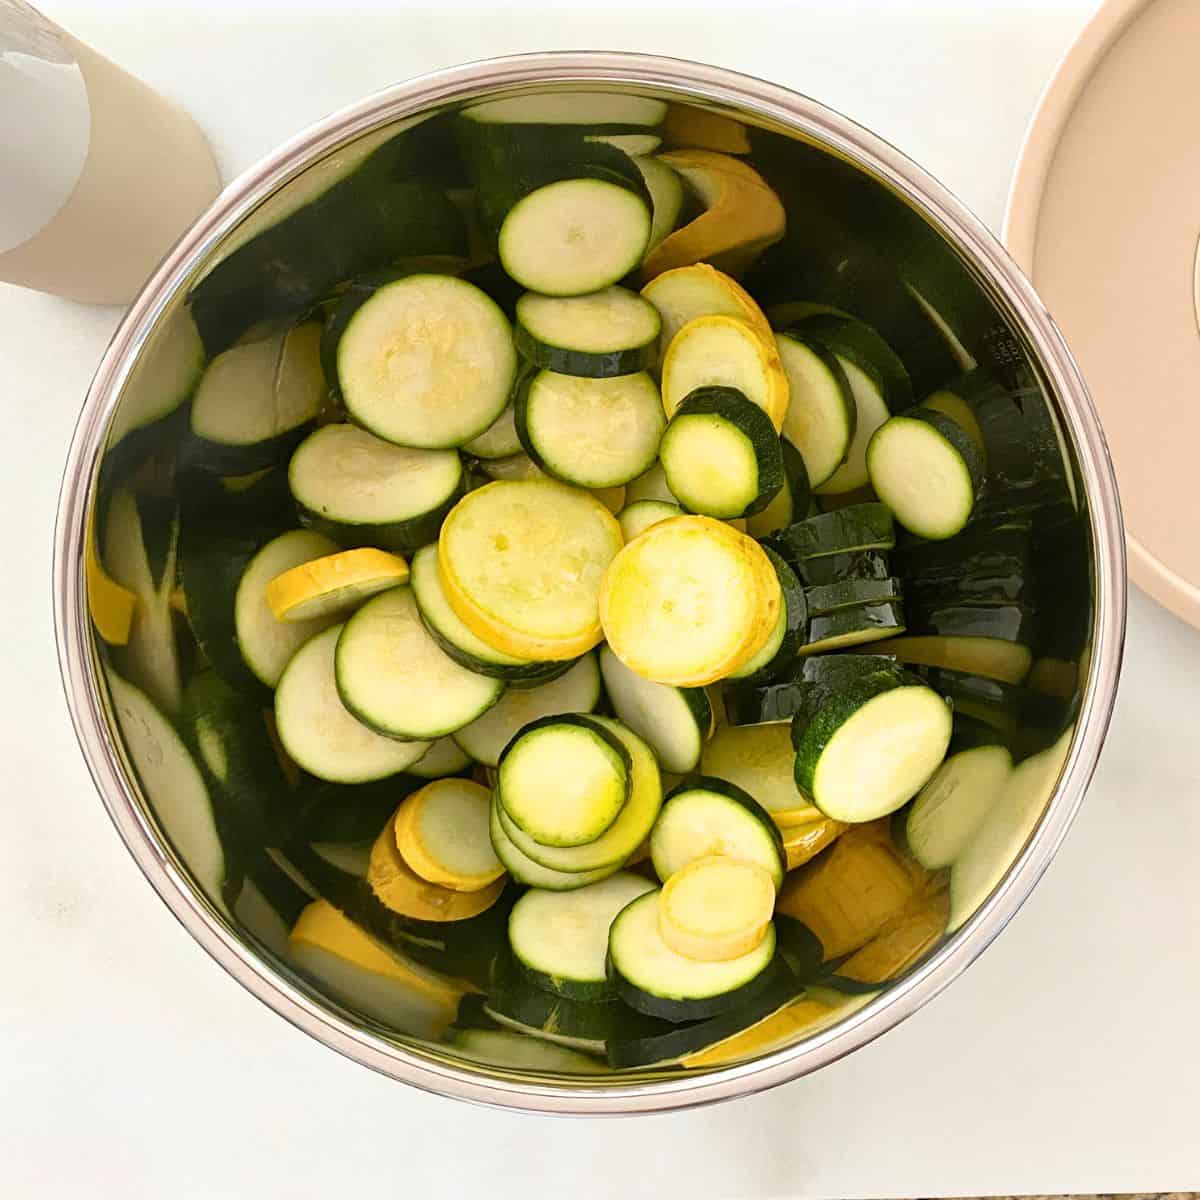 sliced vegetables in stainless steel mixing bowl with olive oil